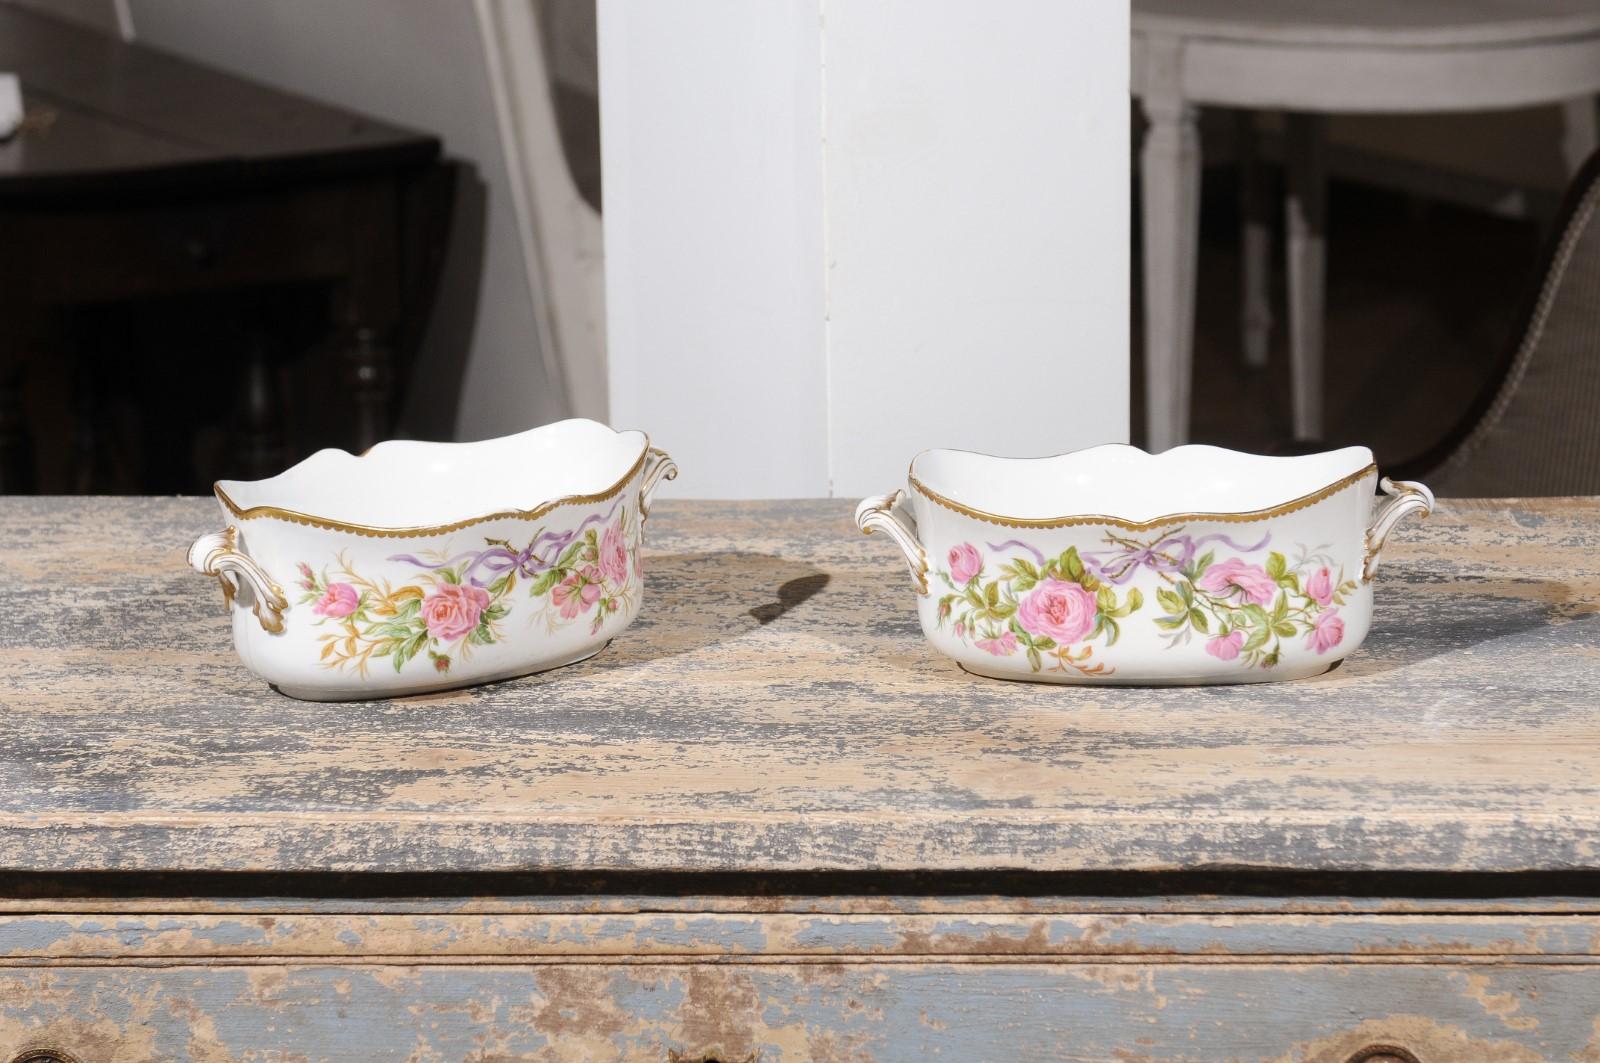 Two English porcelain bowls from the 20th century, with ribbon-tied pink roses and gilt accents, priced and sold individually. Charming our eyes with their graceful lines and delicate décor, each of these two English bowls is adorned with